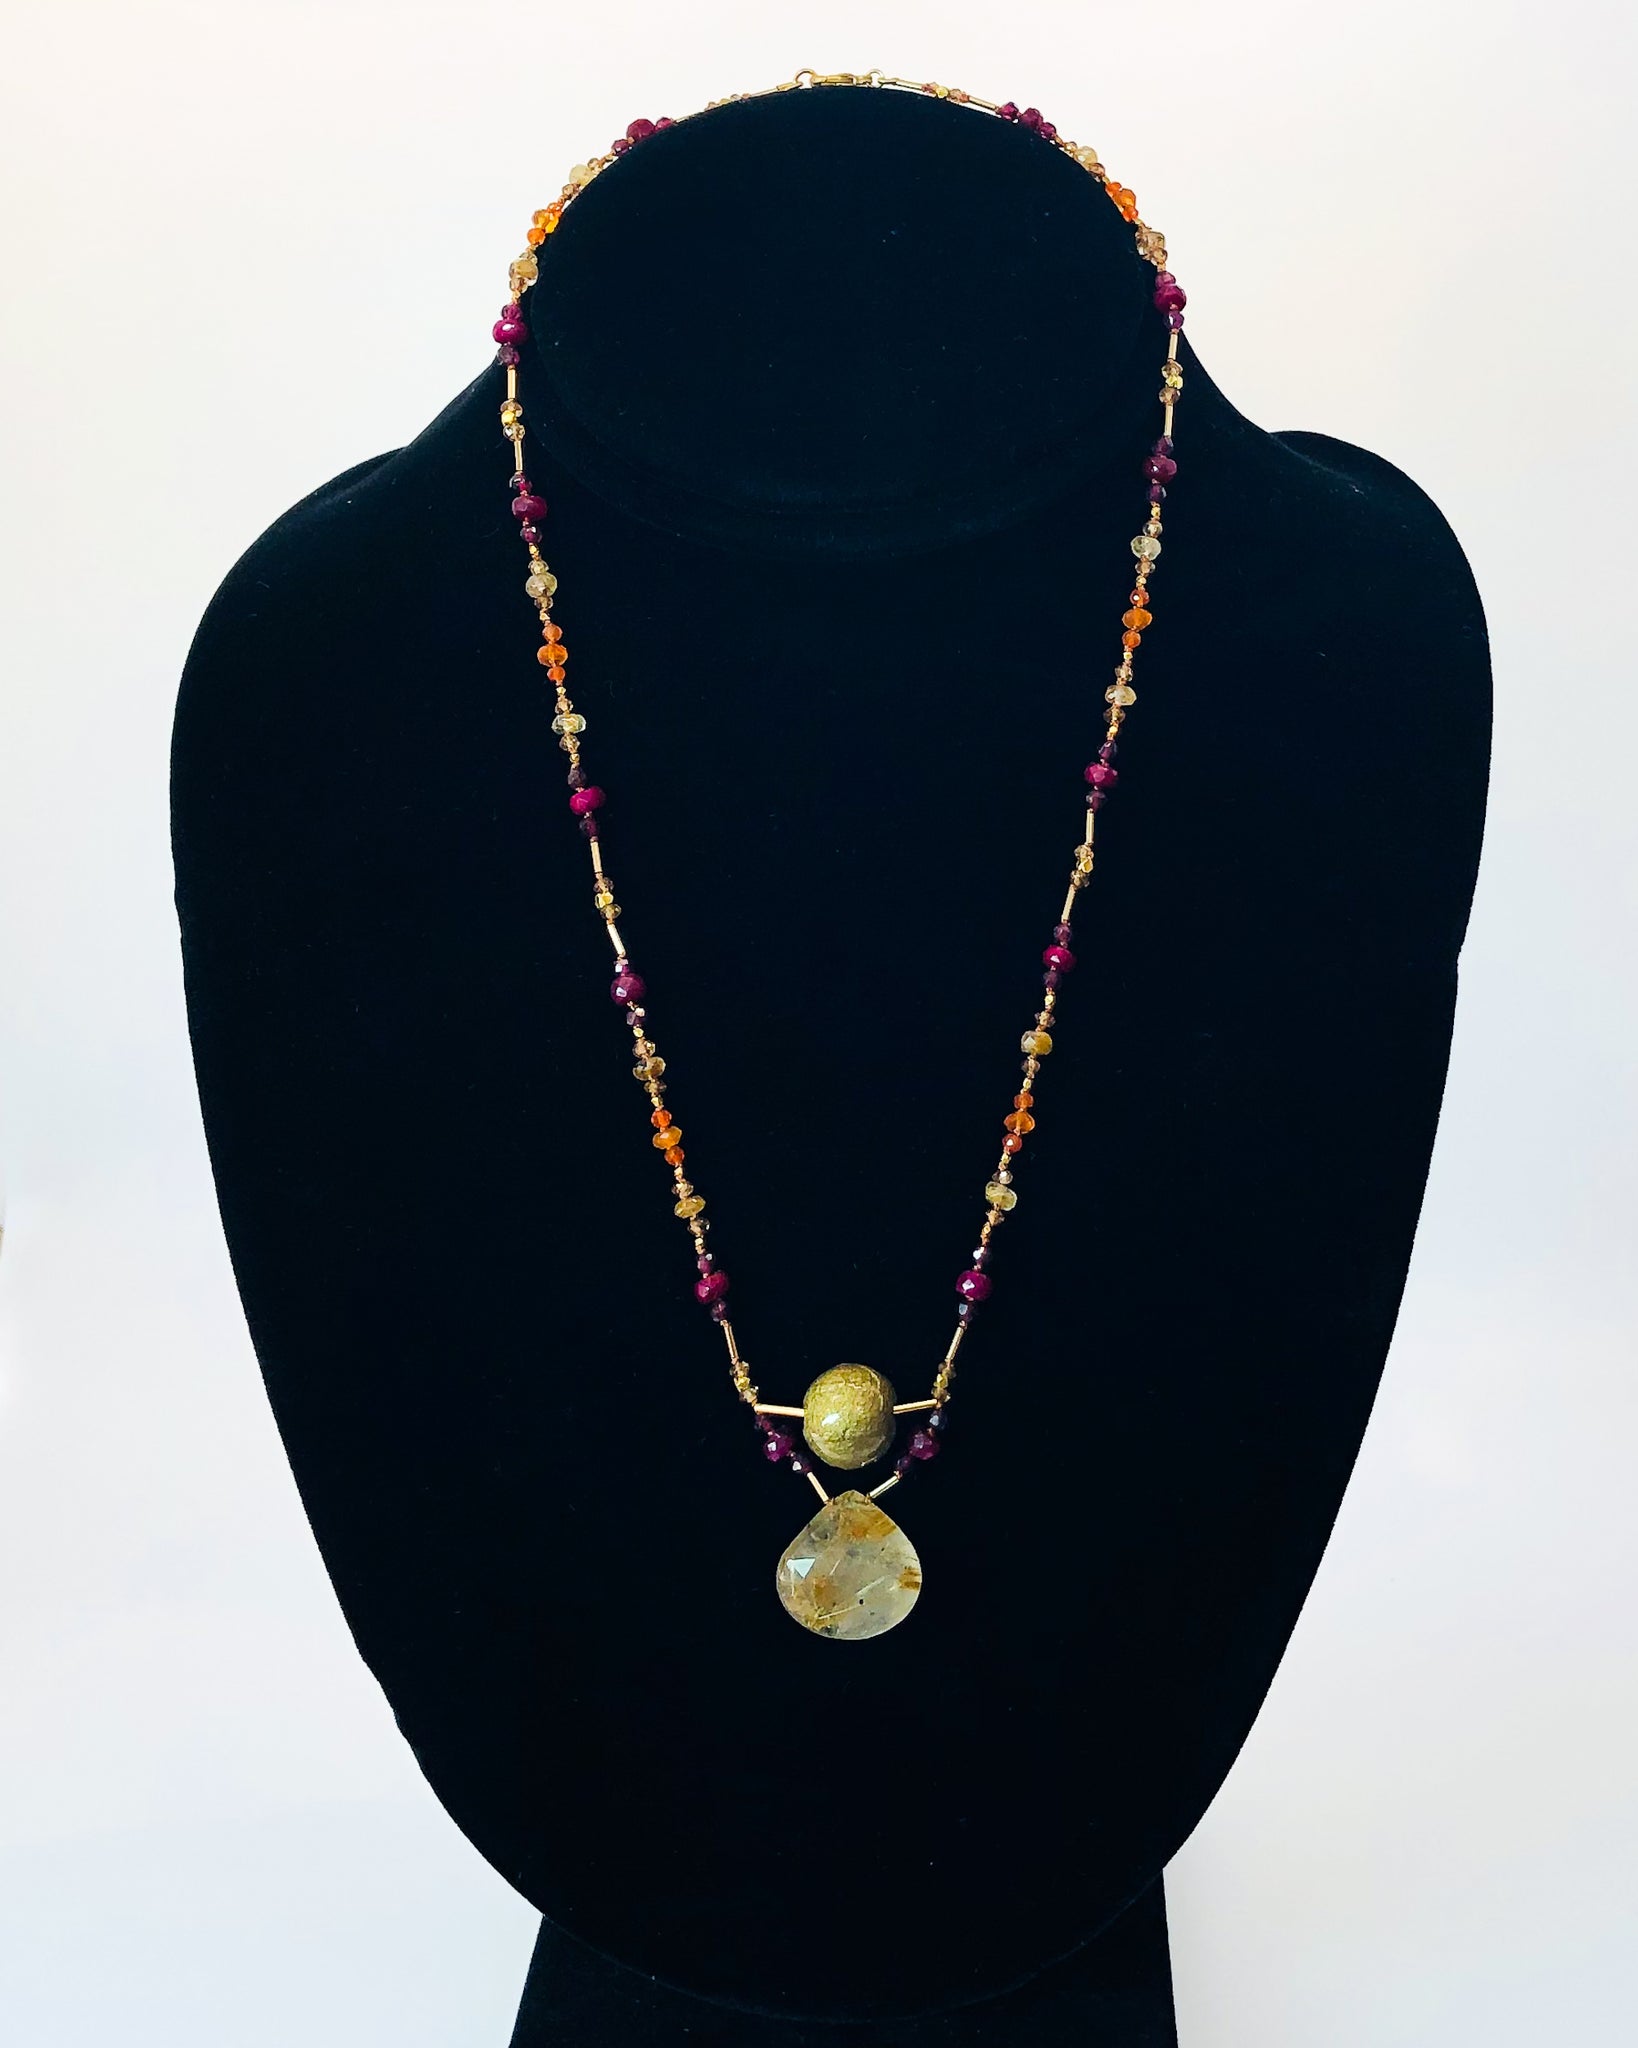 Handmade Paper Bead Pendant Necklace with Knotted Gems